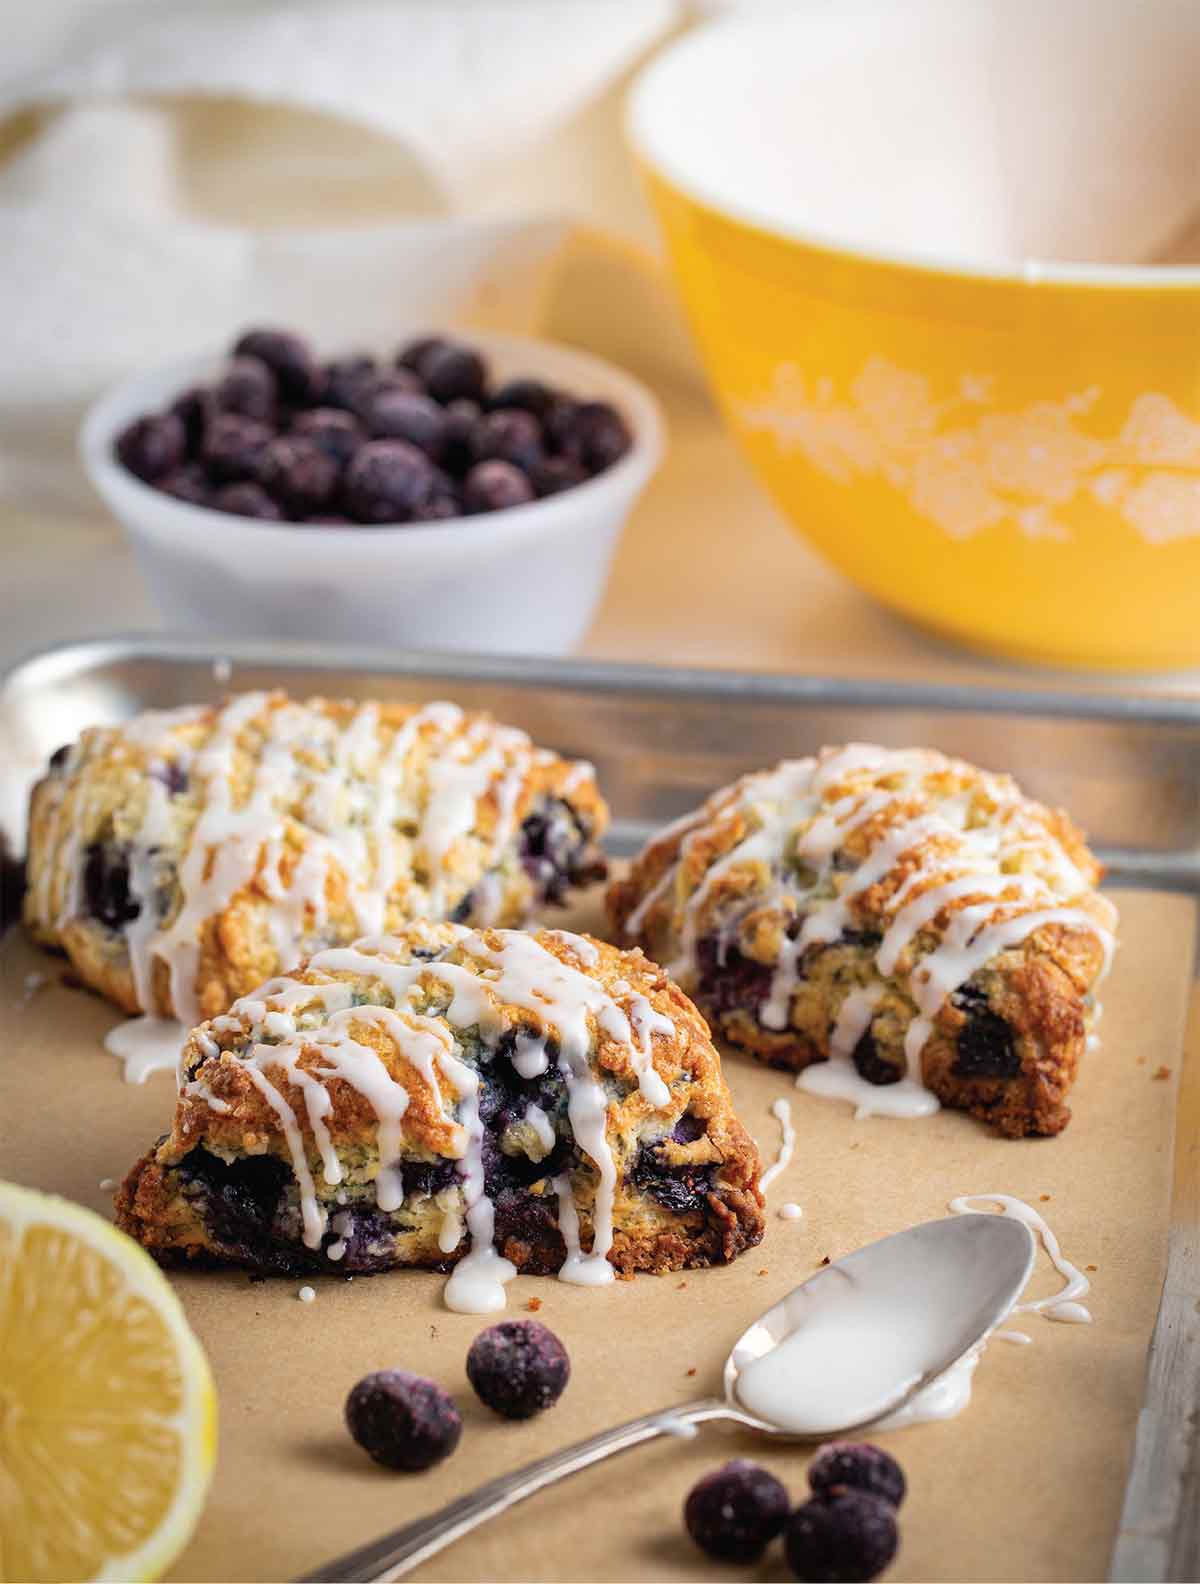 Three glazed blueberry lemon scones on a parchment-lined baking sheet with a lemon half and a spoon on the side.